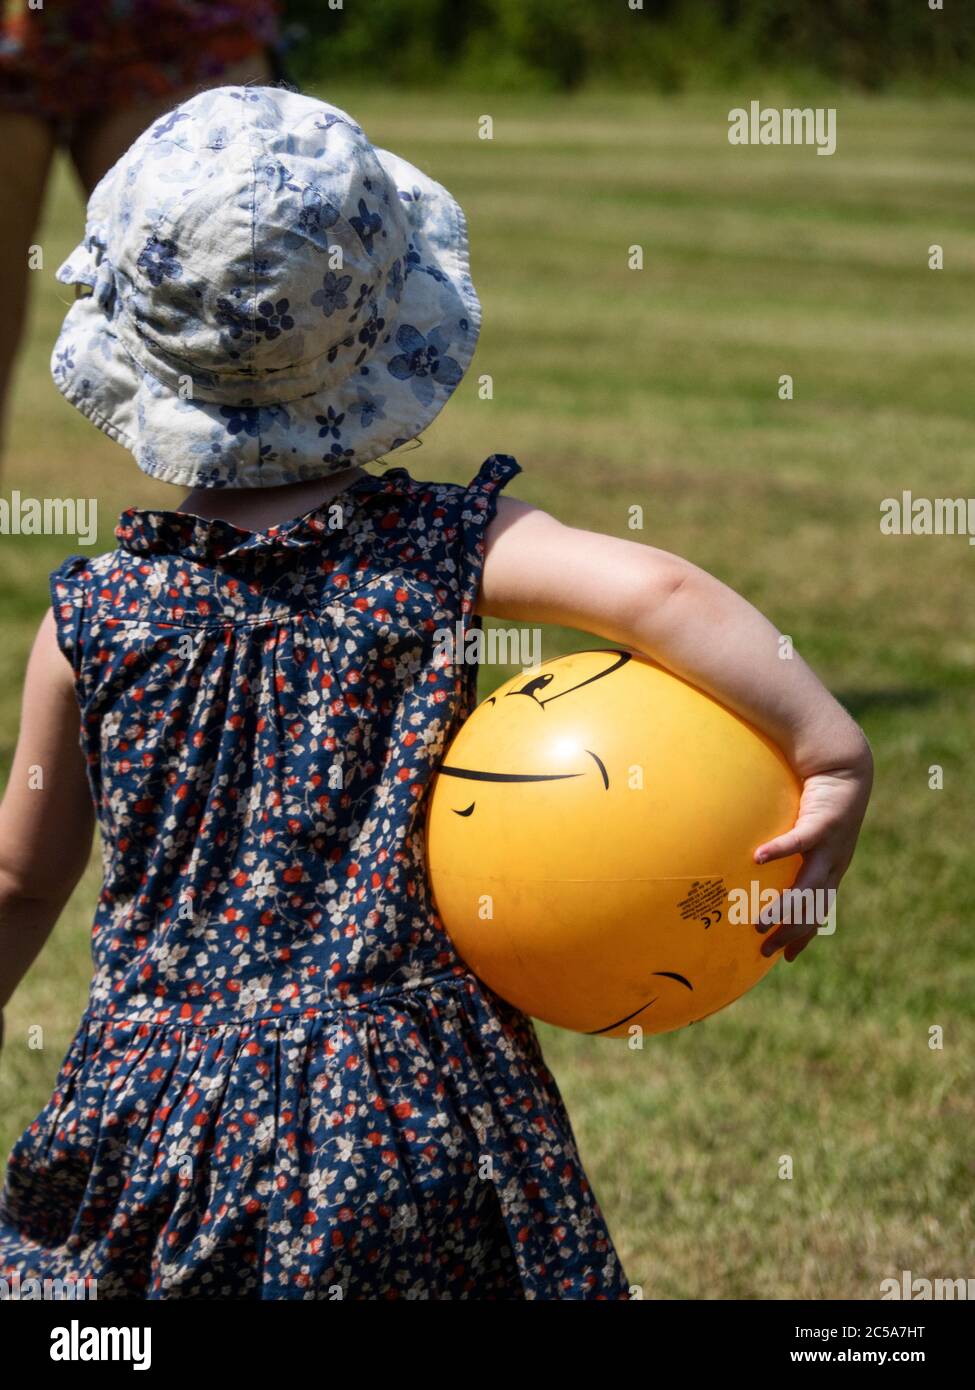 Toddler carrying a ball under her arm, UK Stock Photo